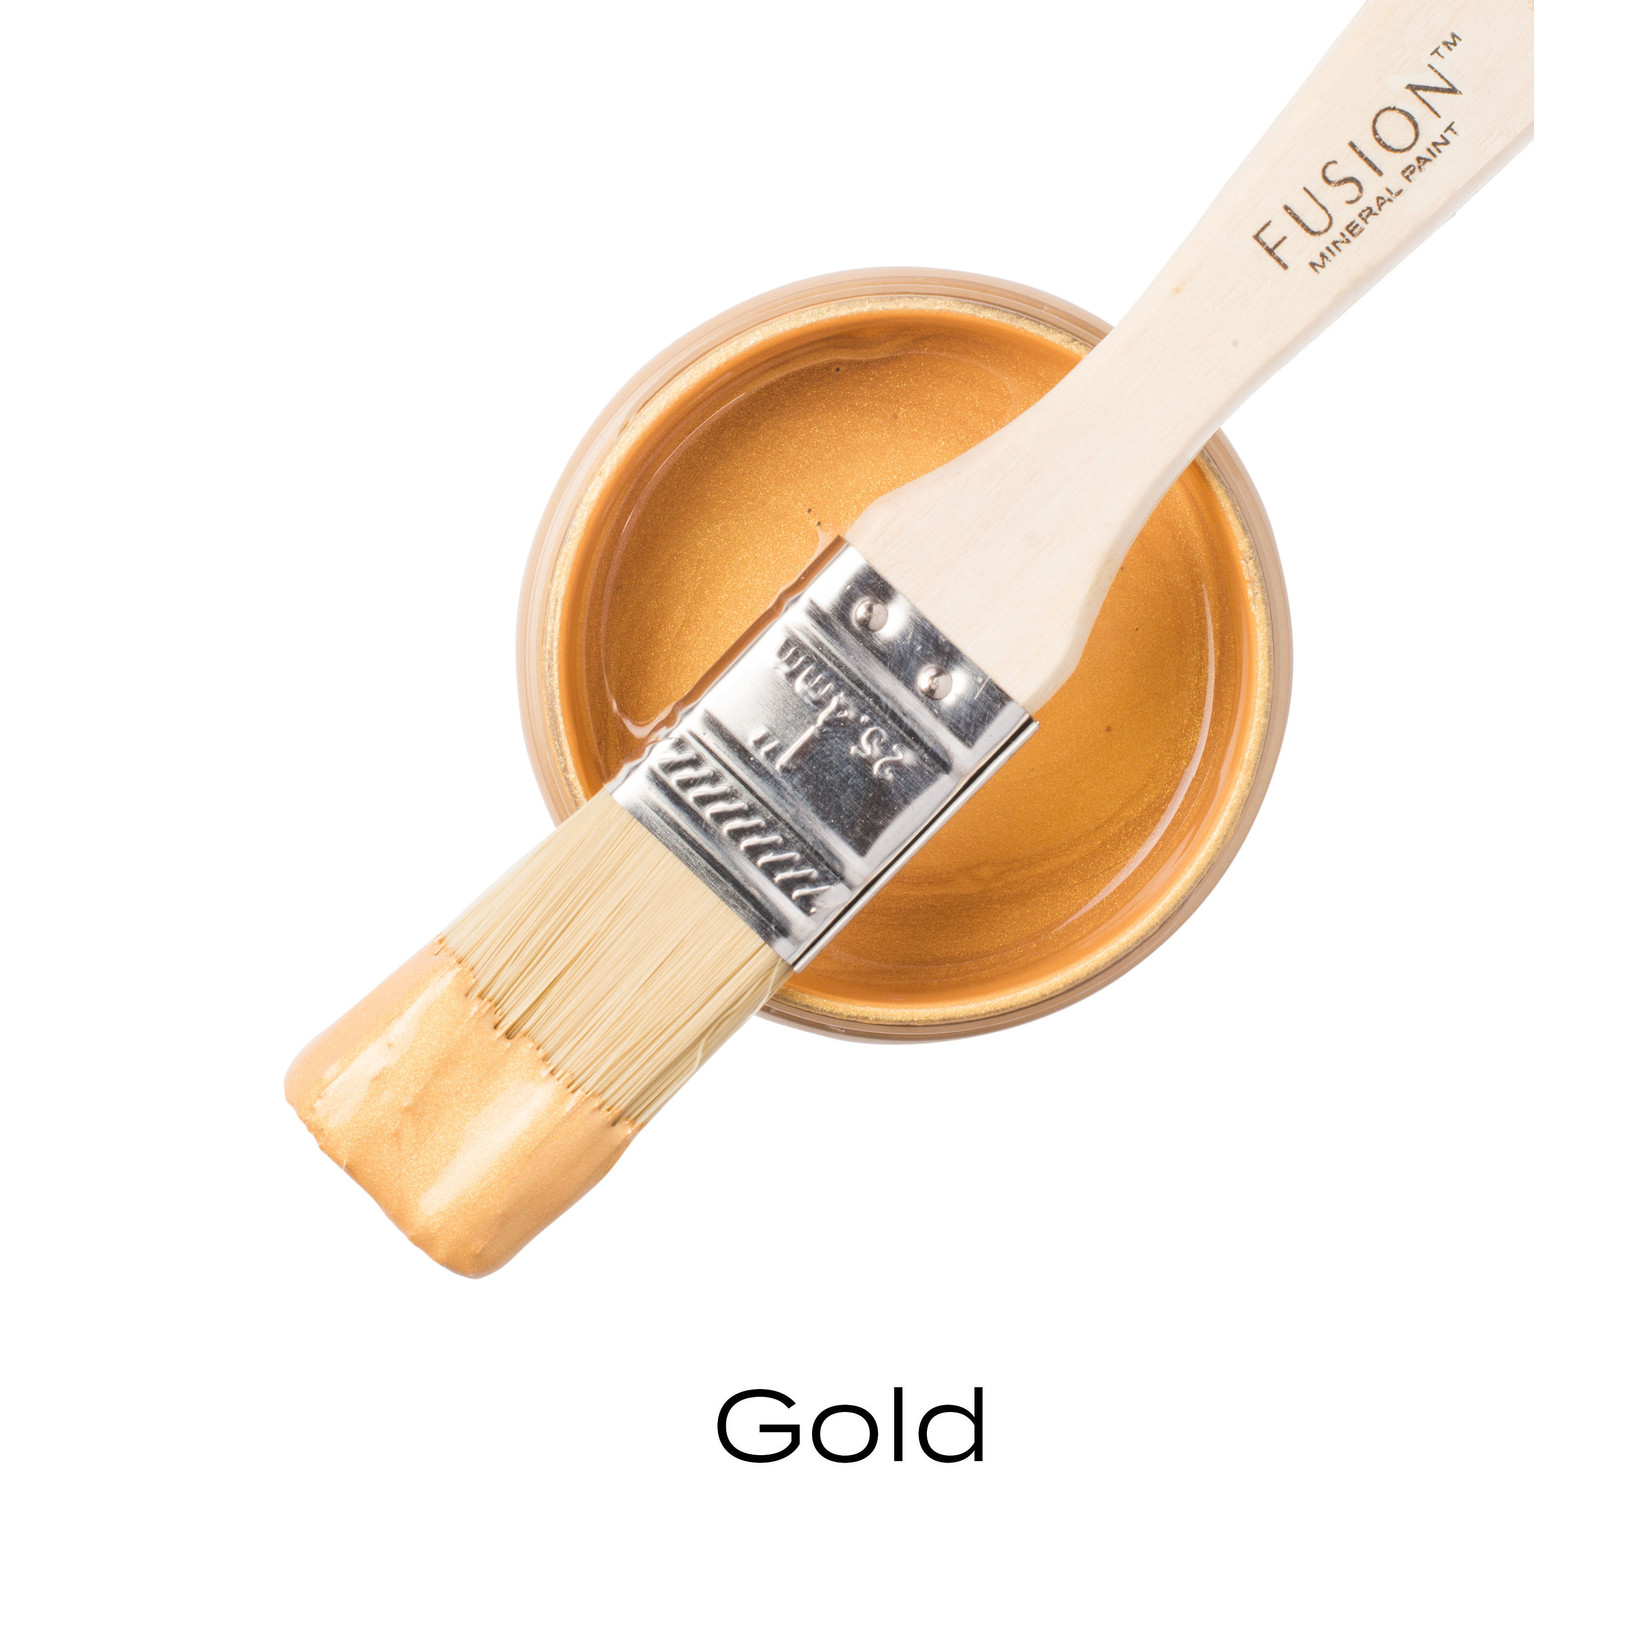 Fusion Mineral Paint™ - Metallic Gold